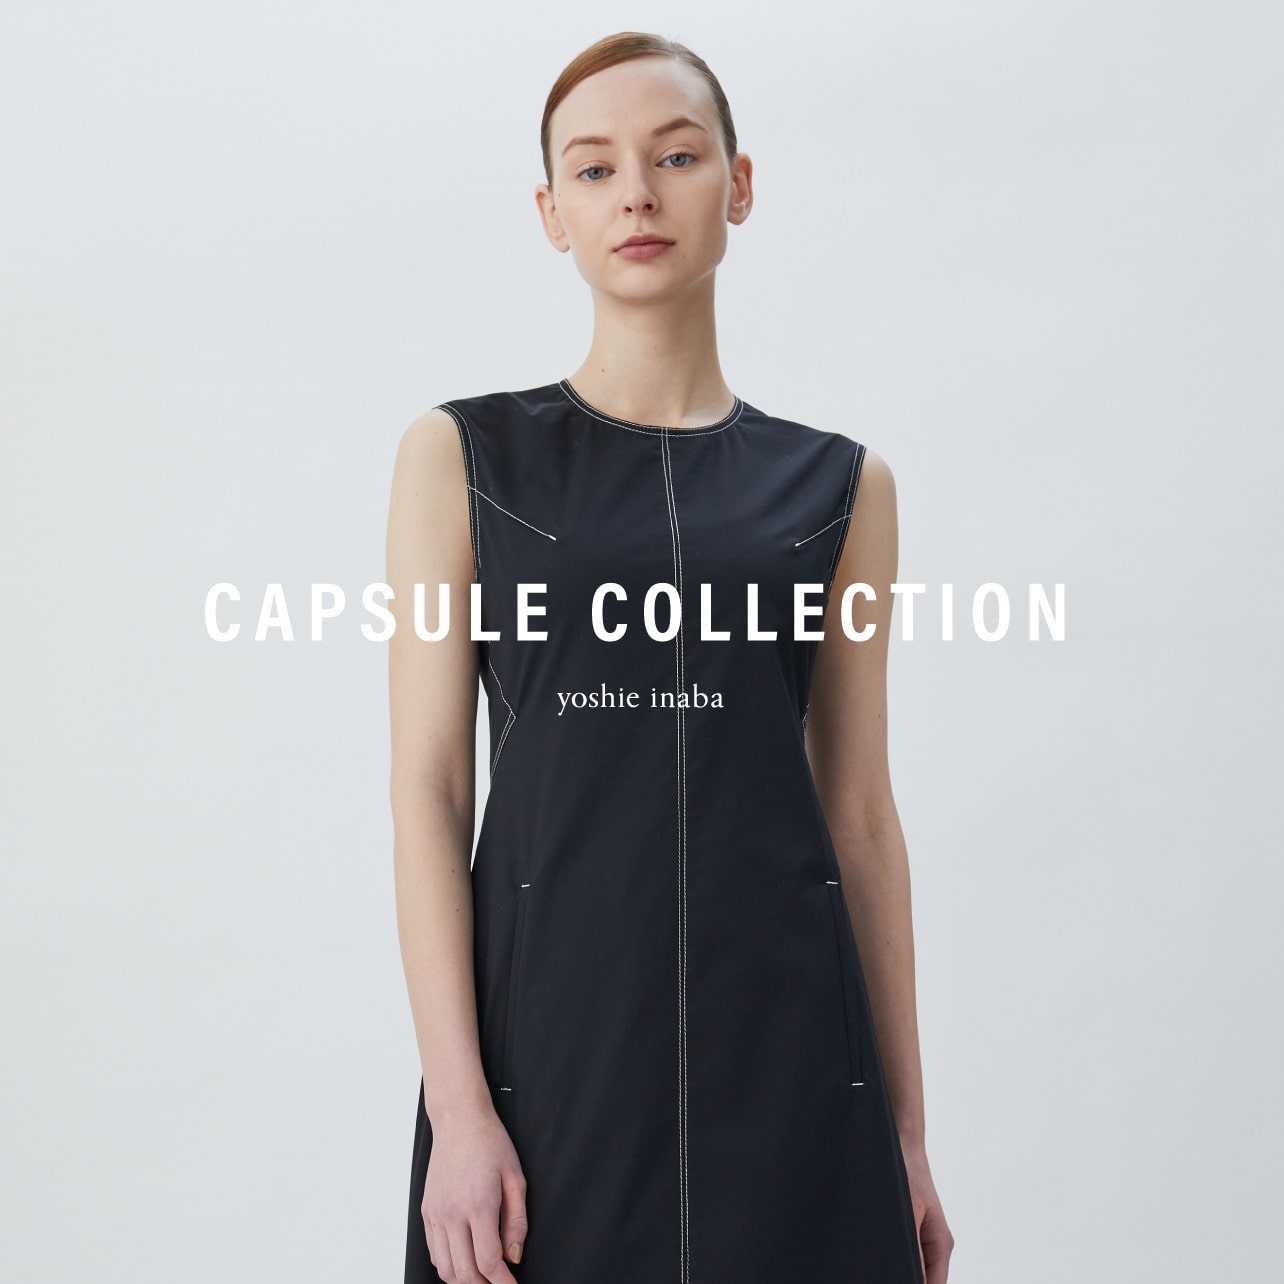 CAPSULE COLLECTION NEWS